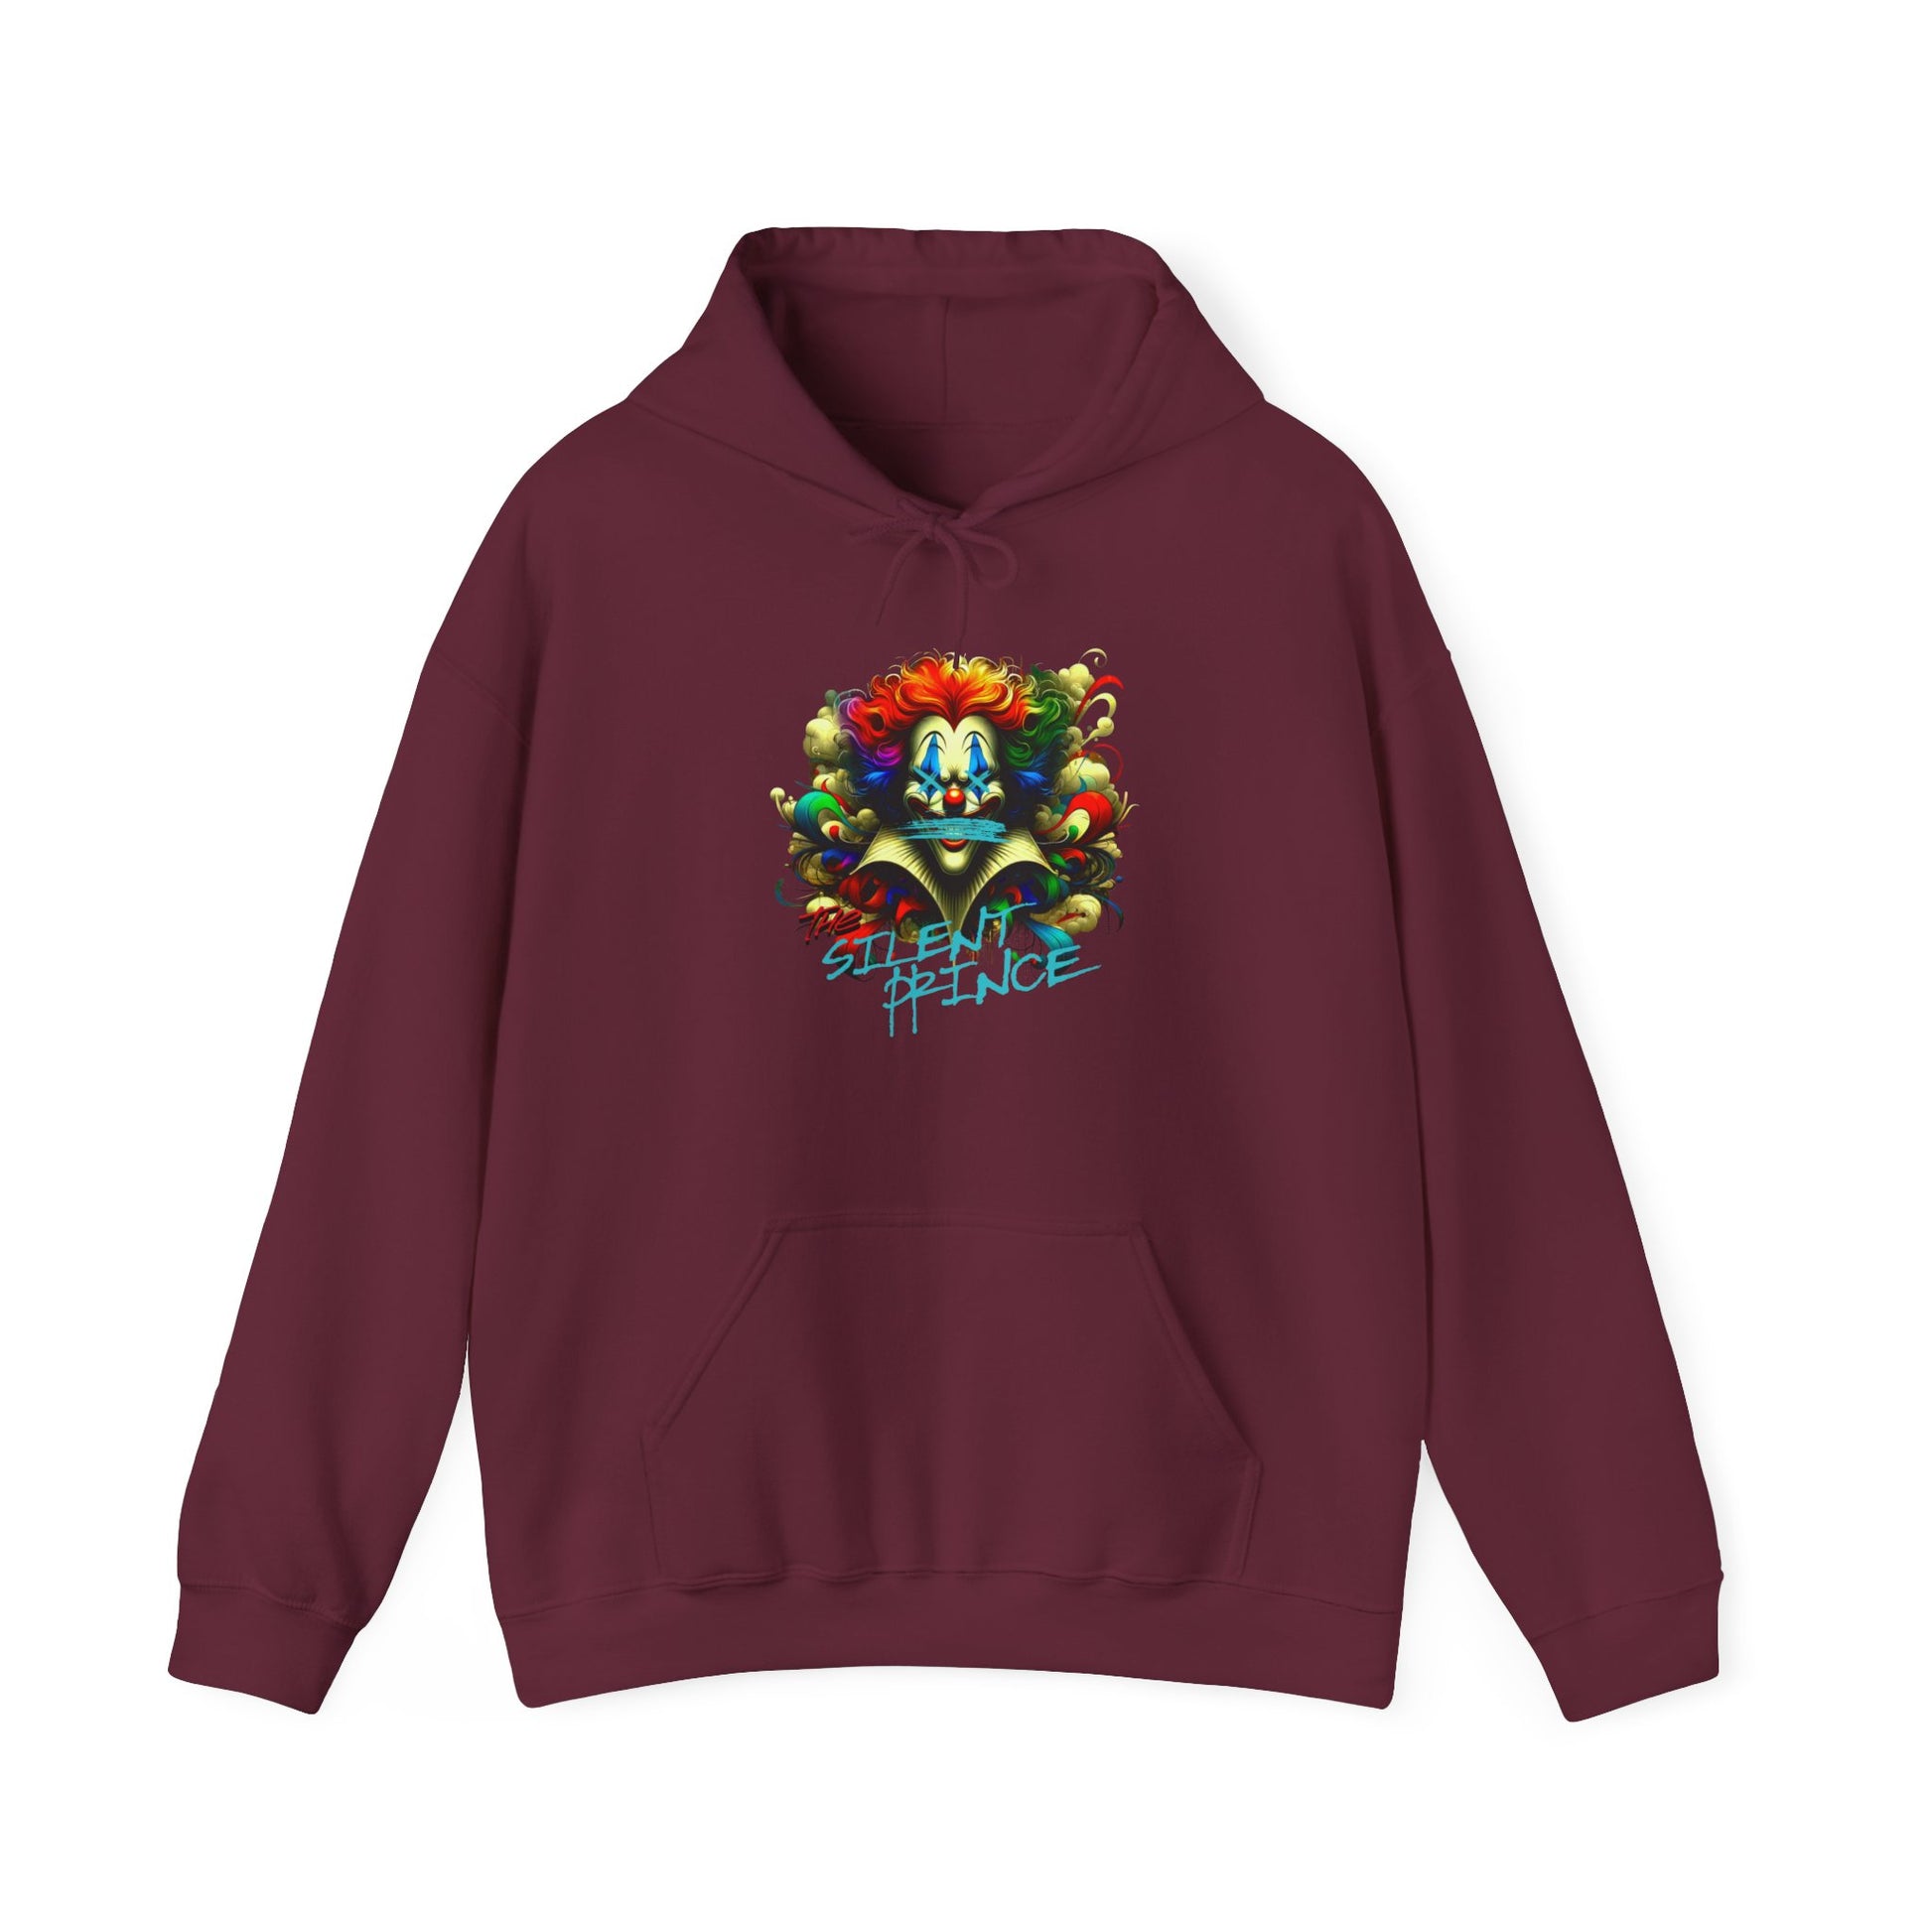 A hooded sweatshirt with a vibrant, silent clown prince, for those whose style speaks volumes in hush tones